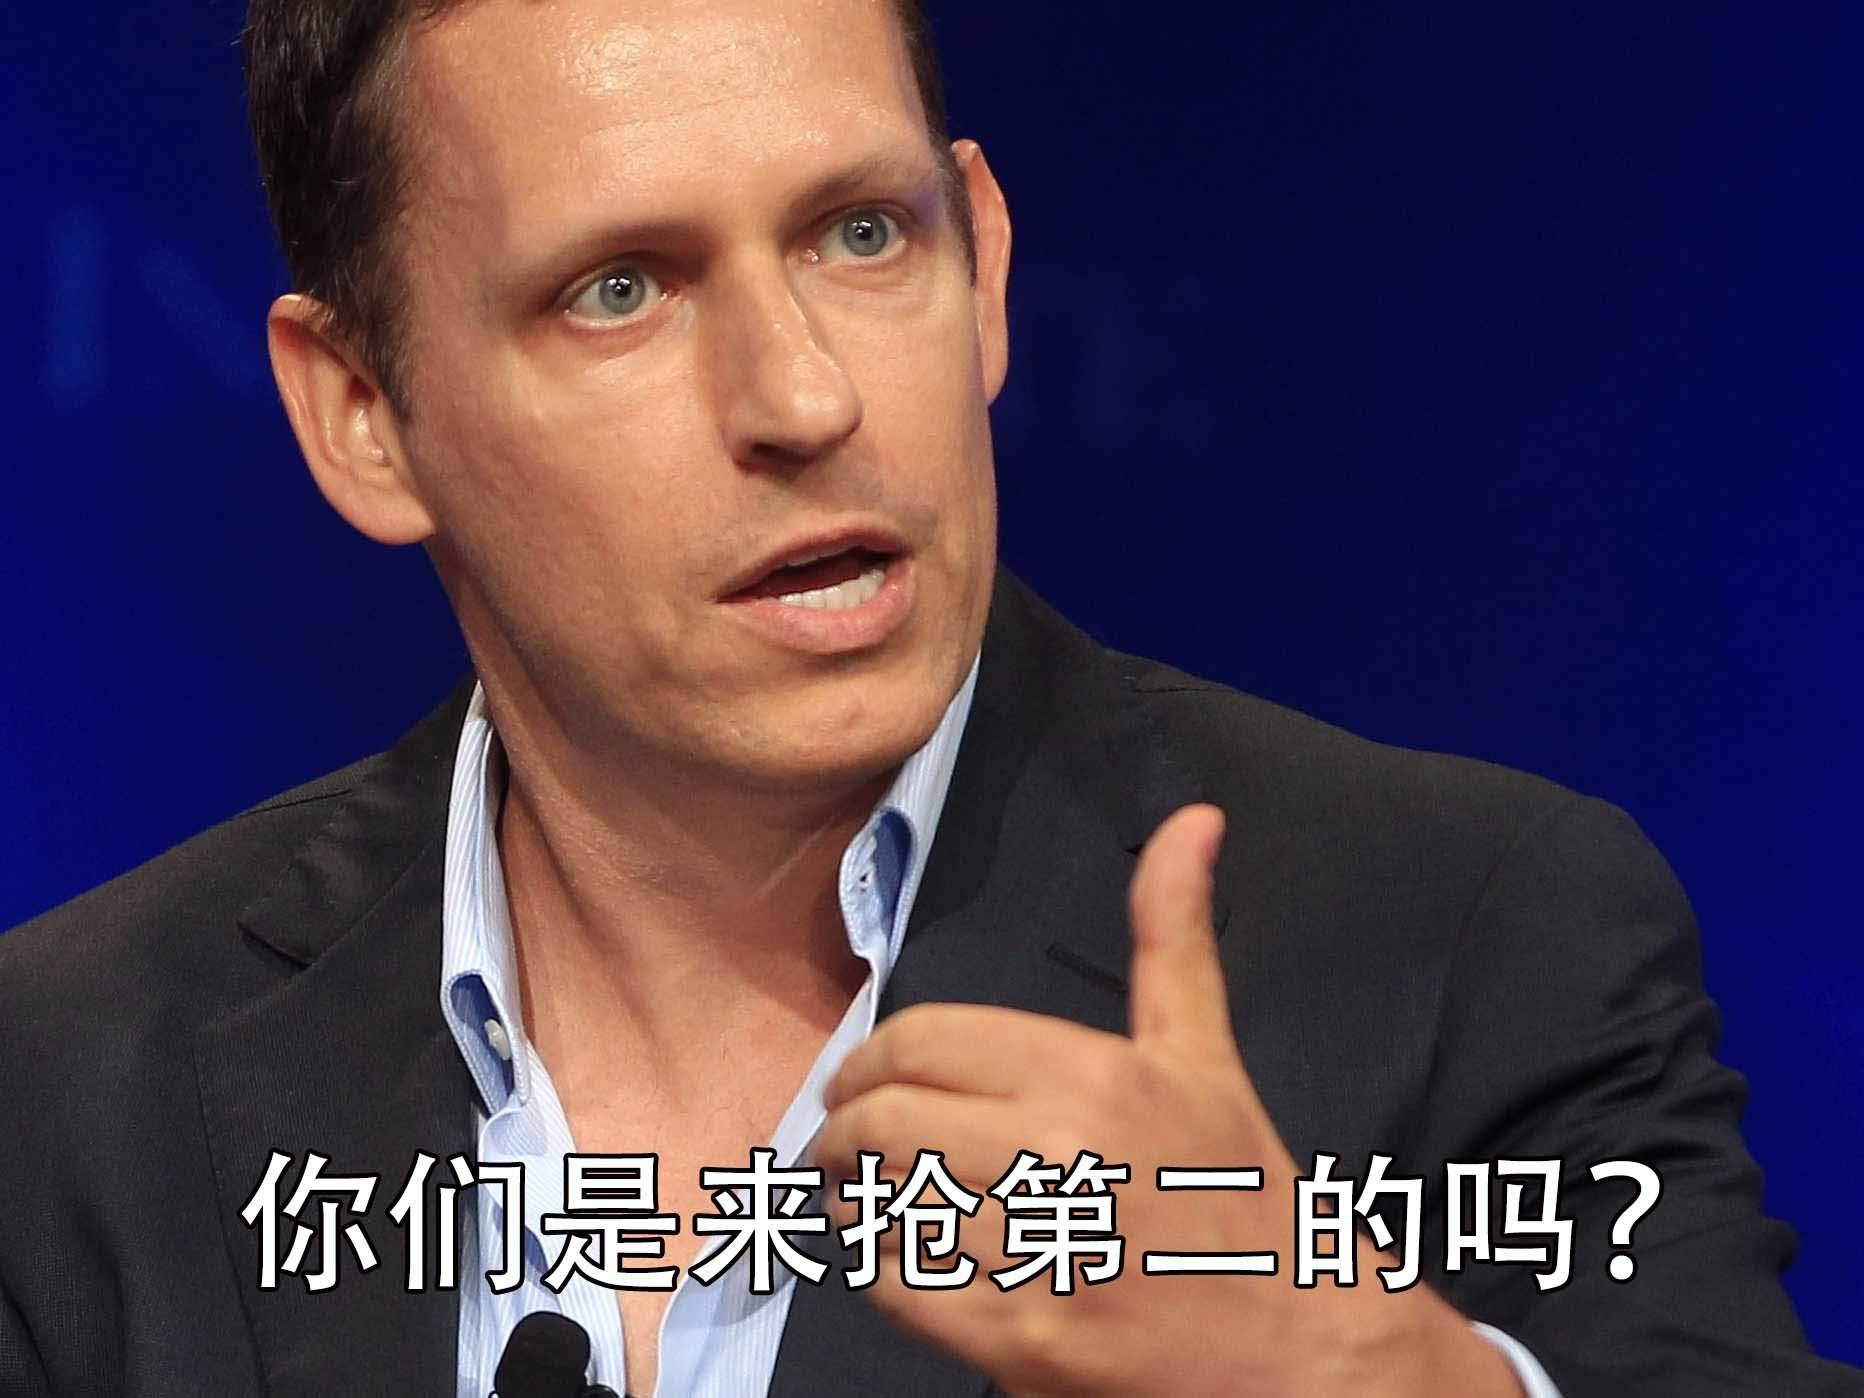 peter-thiel-aspergers-can-be-a-big-advantage-in-silicon-valley副本.jpg